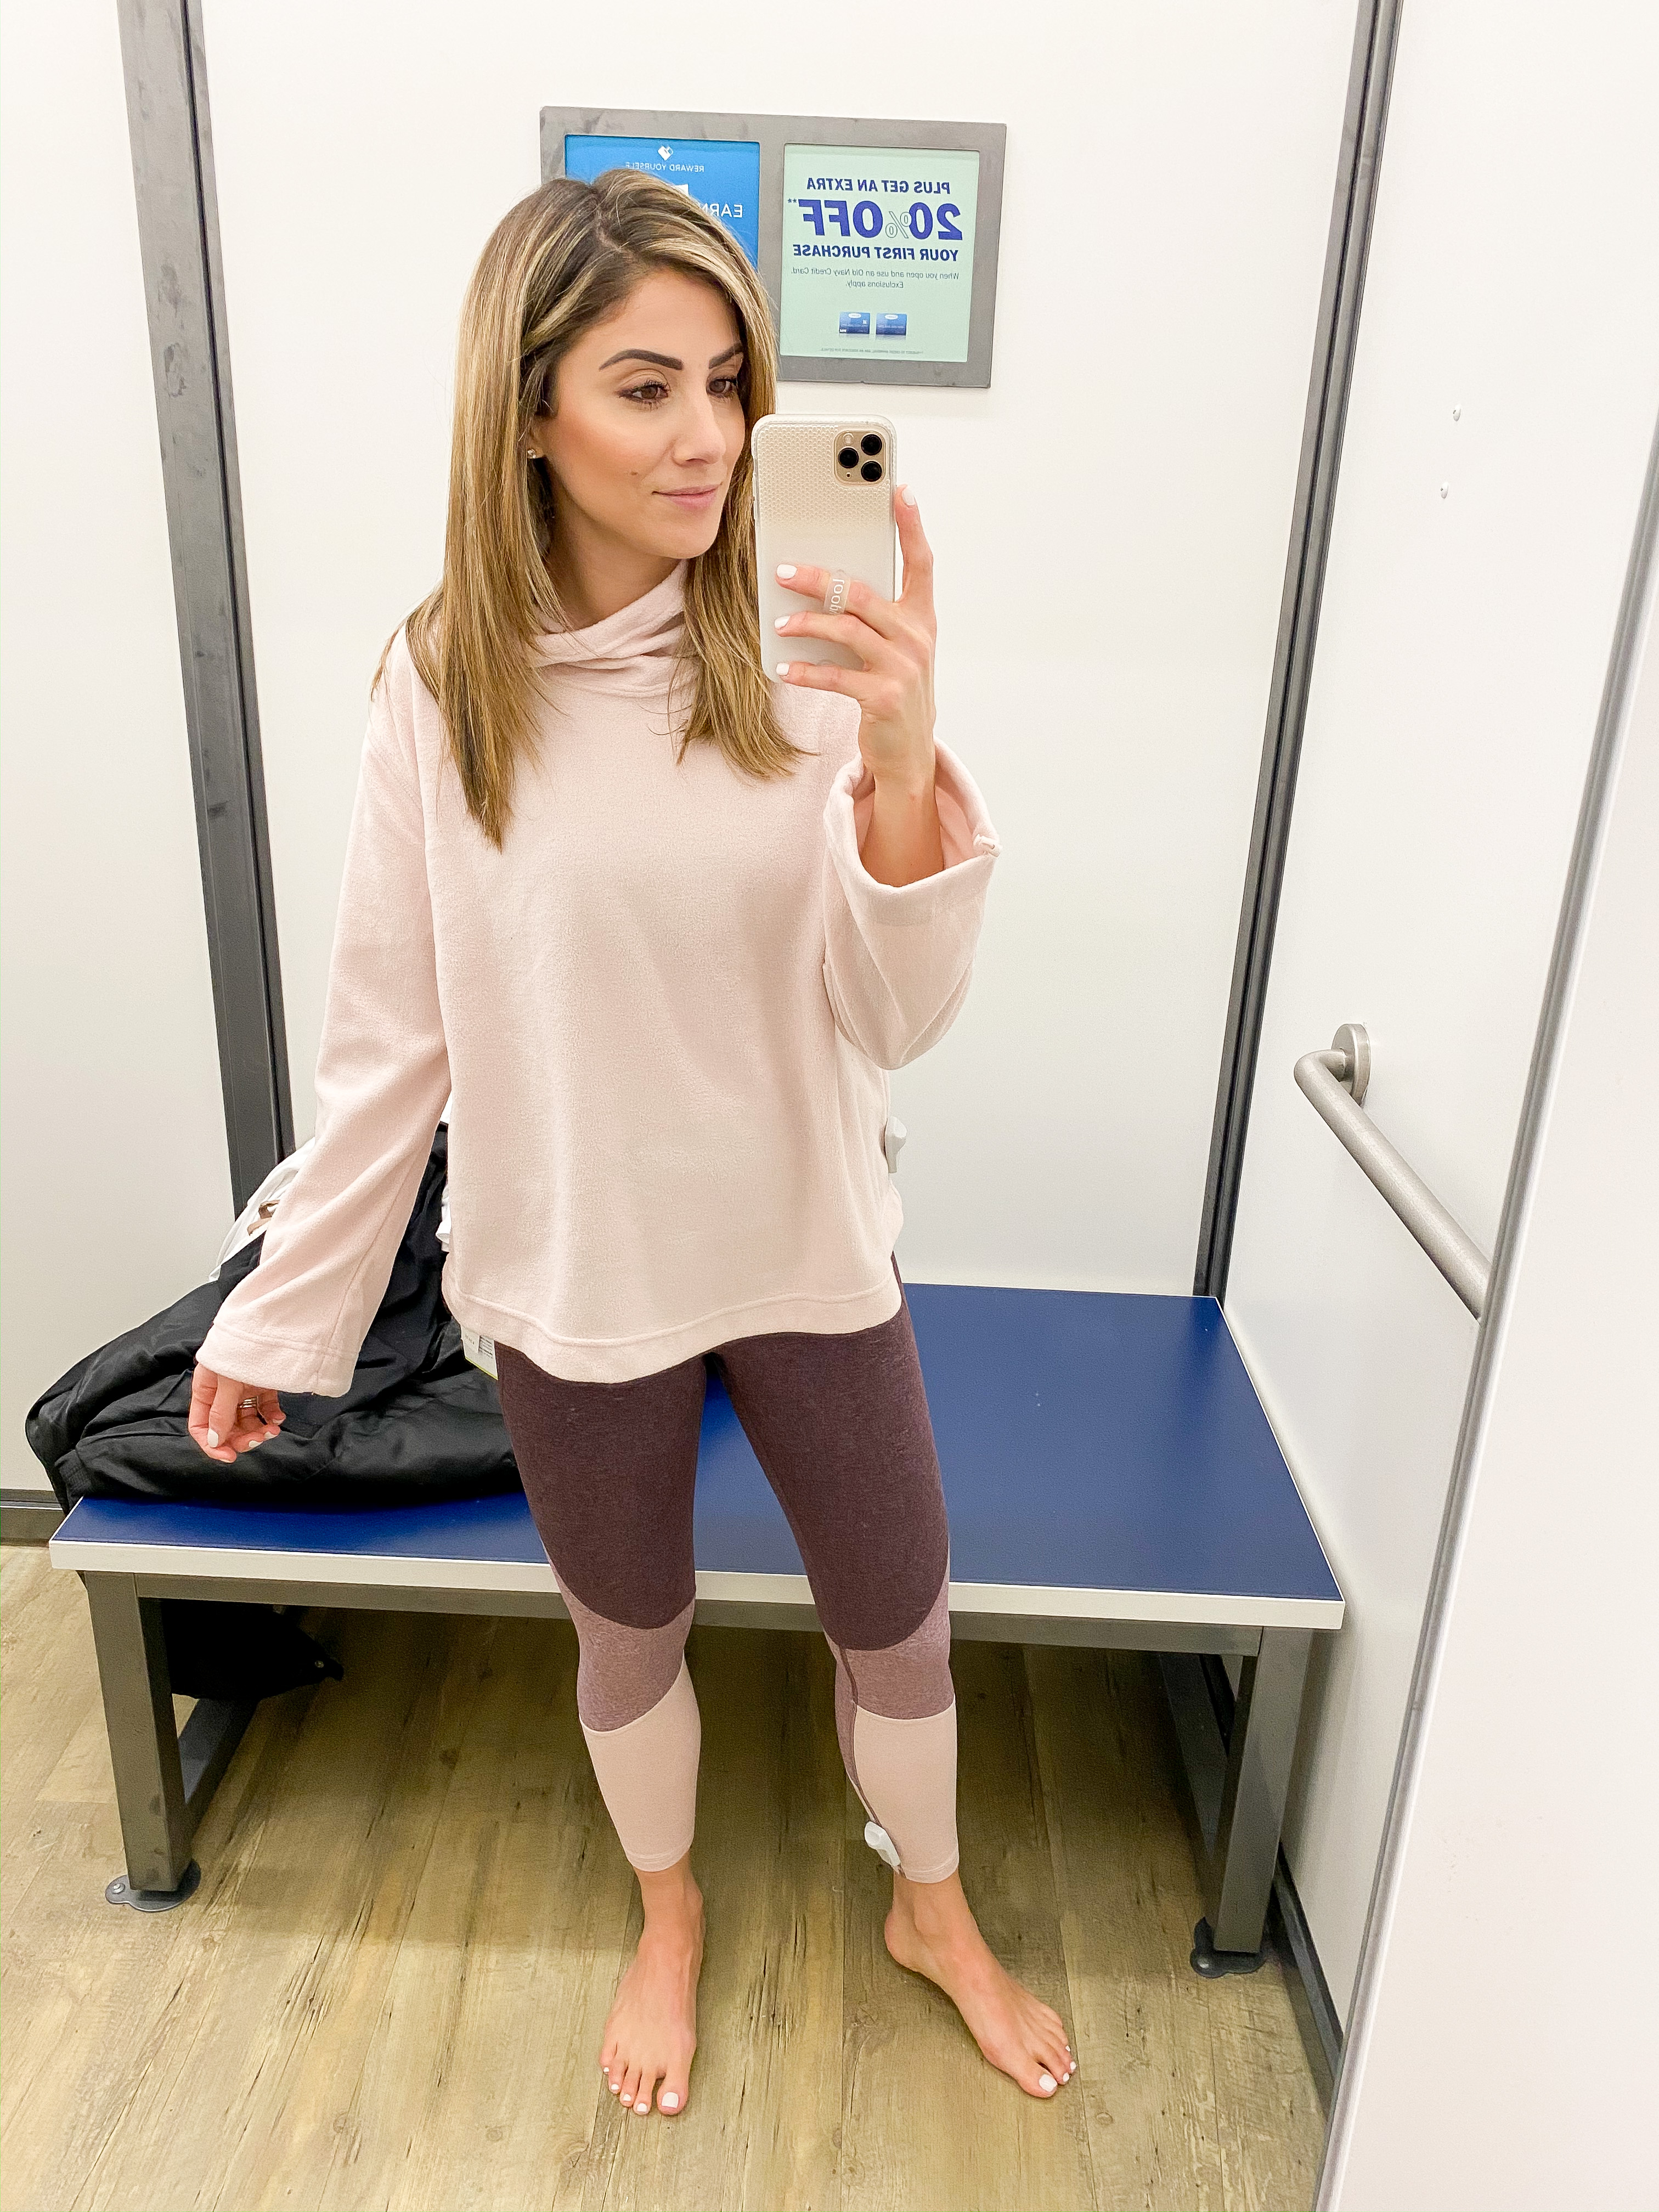 Connecticut life and style blogger Lauren McBride shares an Old Navy try on featuring athletic clothing and athleisure wear.